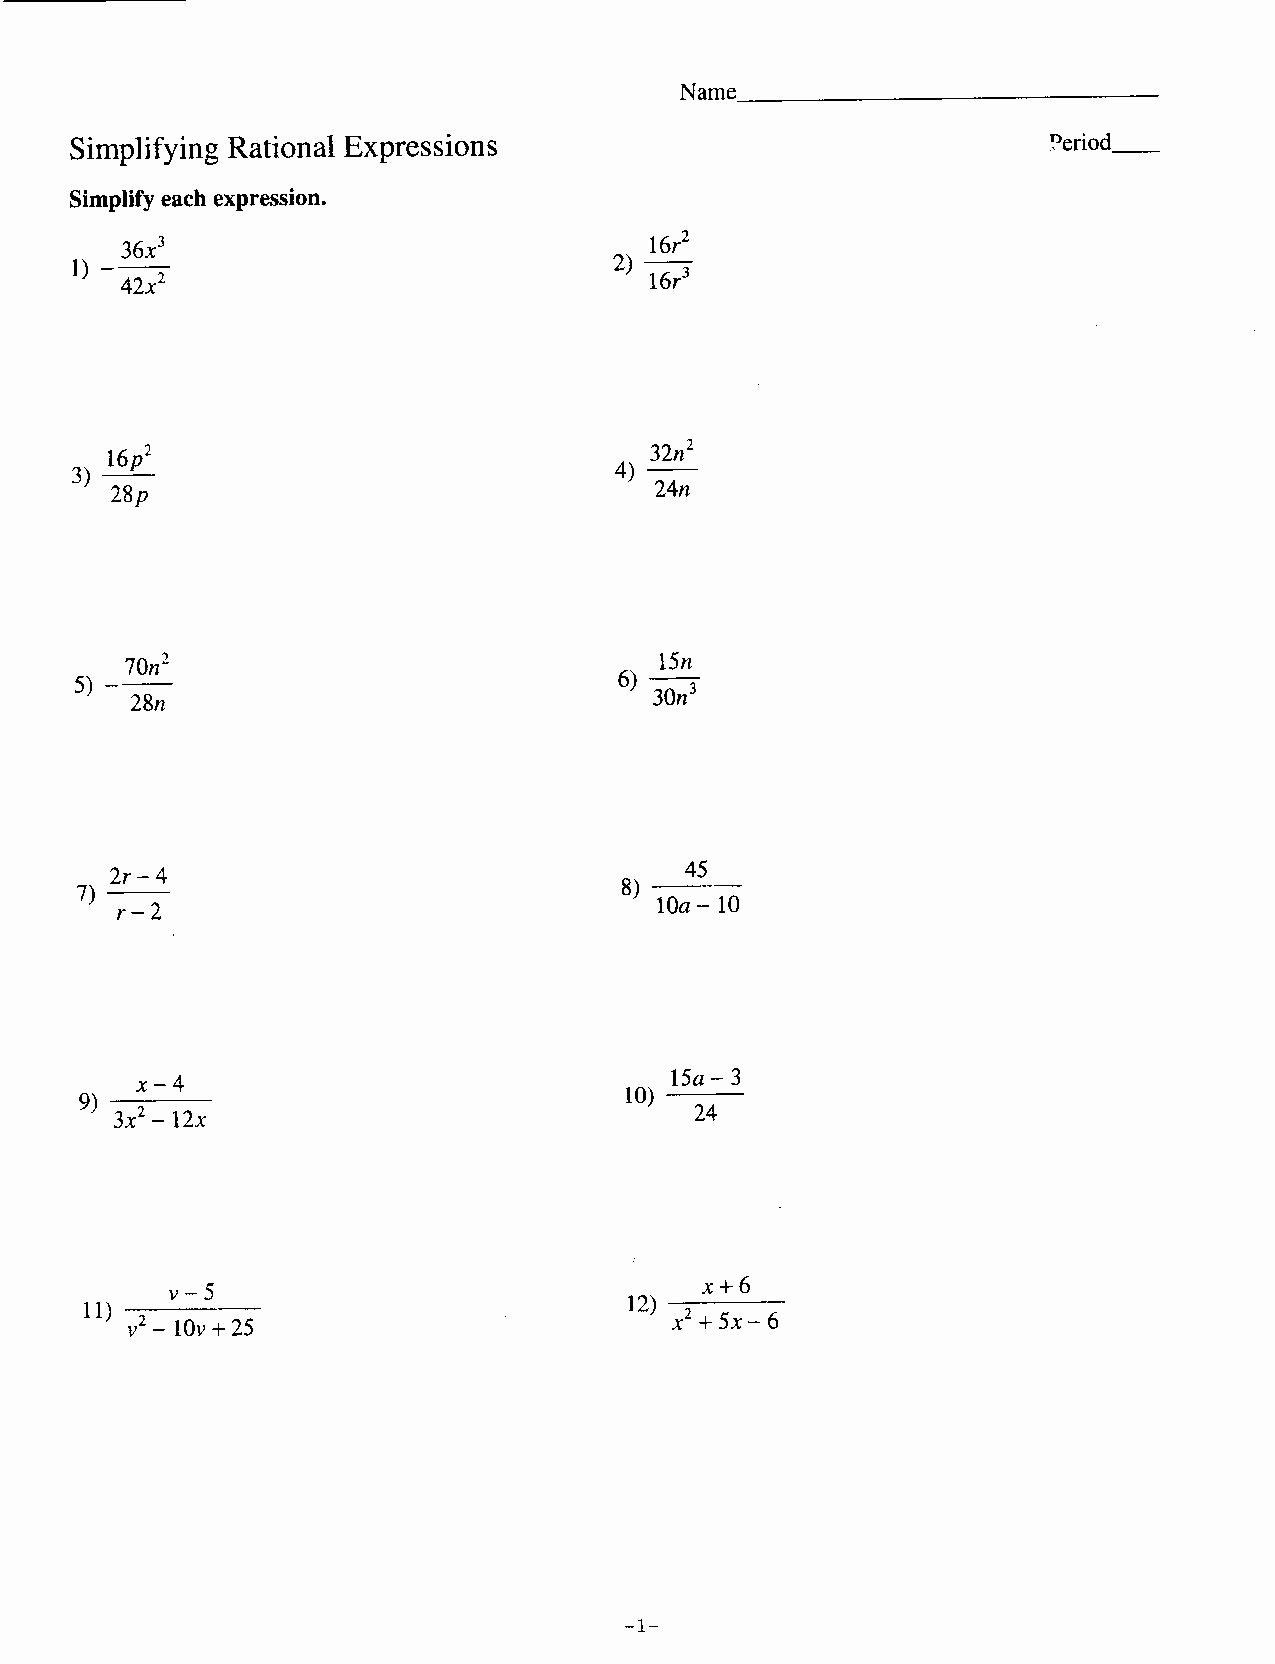 Simplifying Expressions Worksheet with Answers Pin On Professionally Designed Worksheets